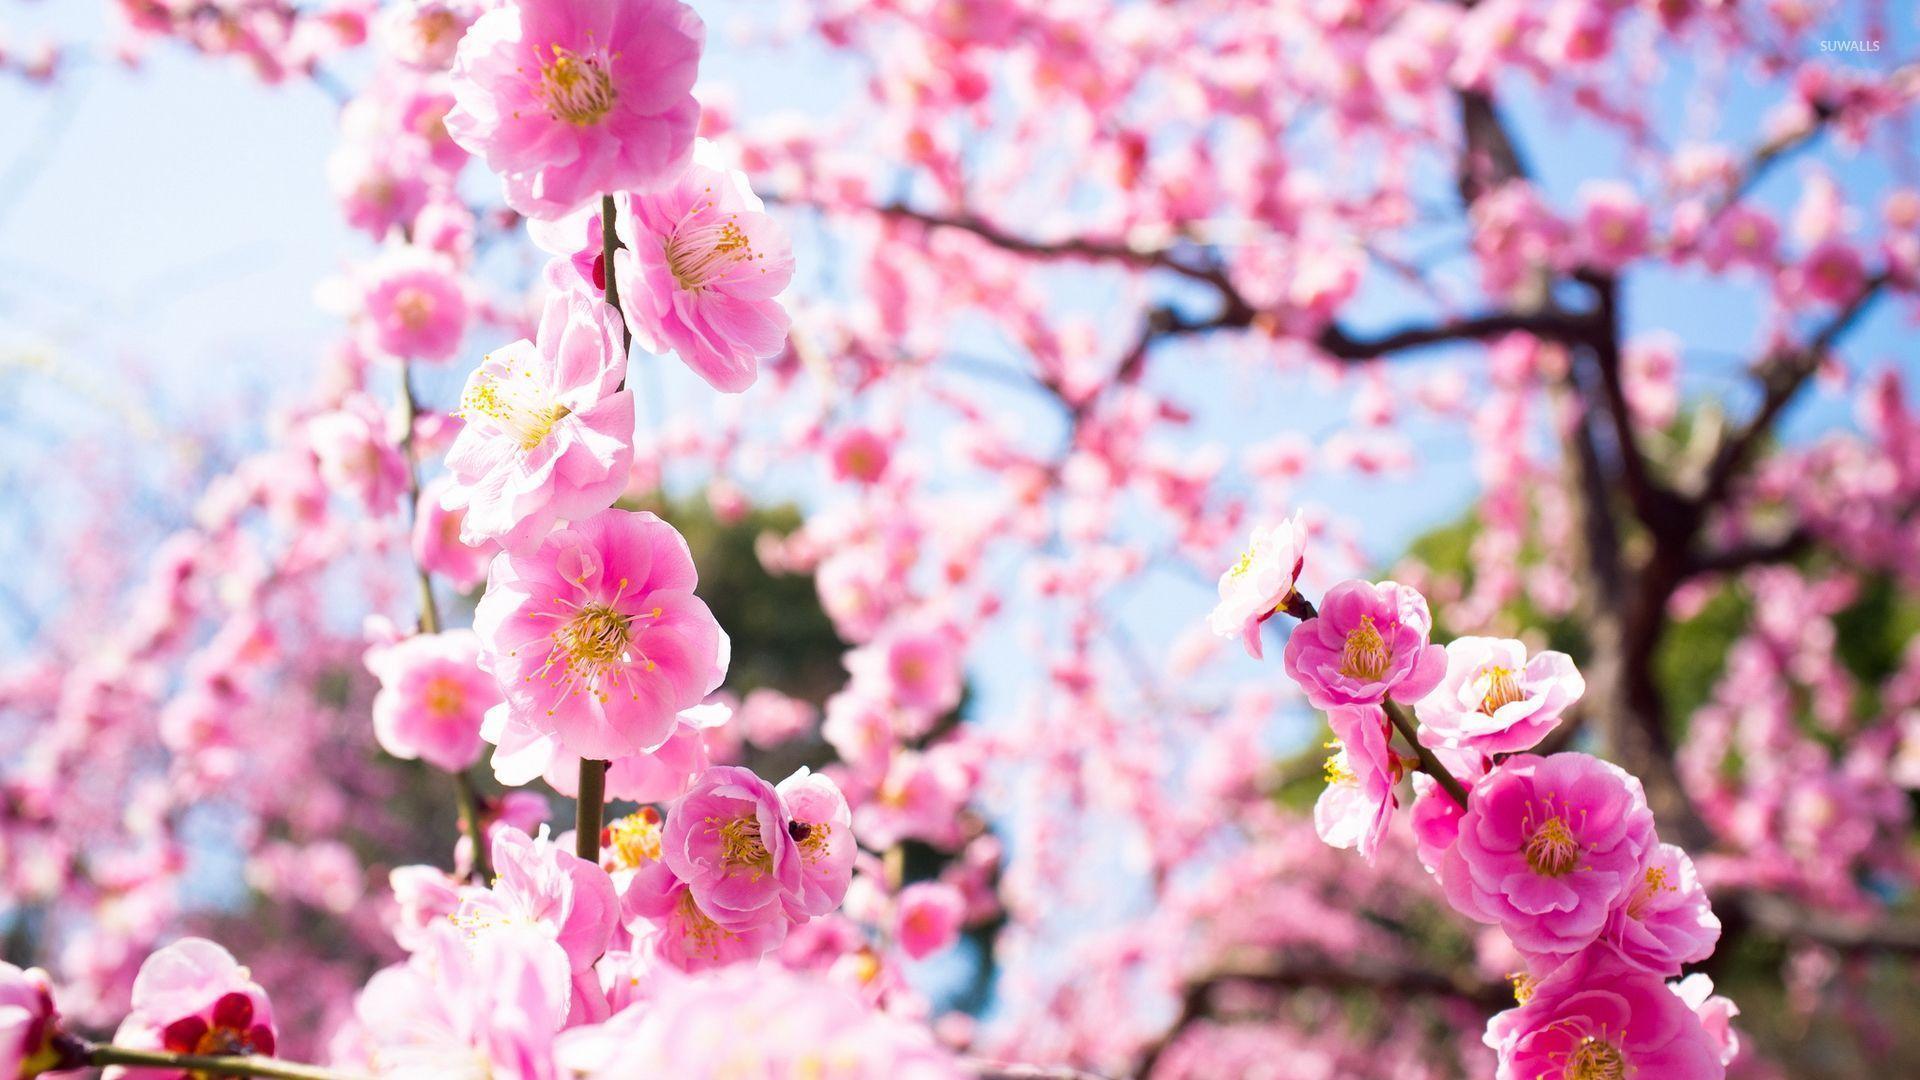 Pink blossoms in the light wallpaper wallpaper